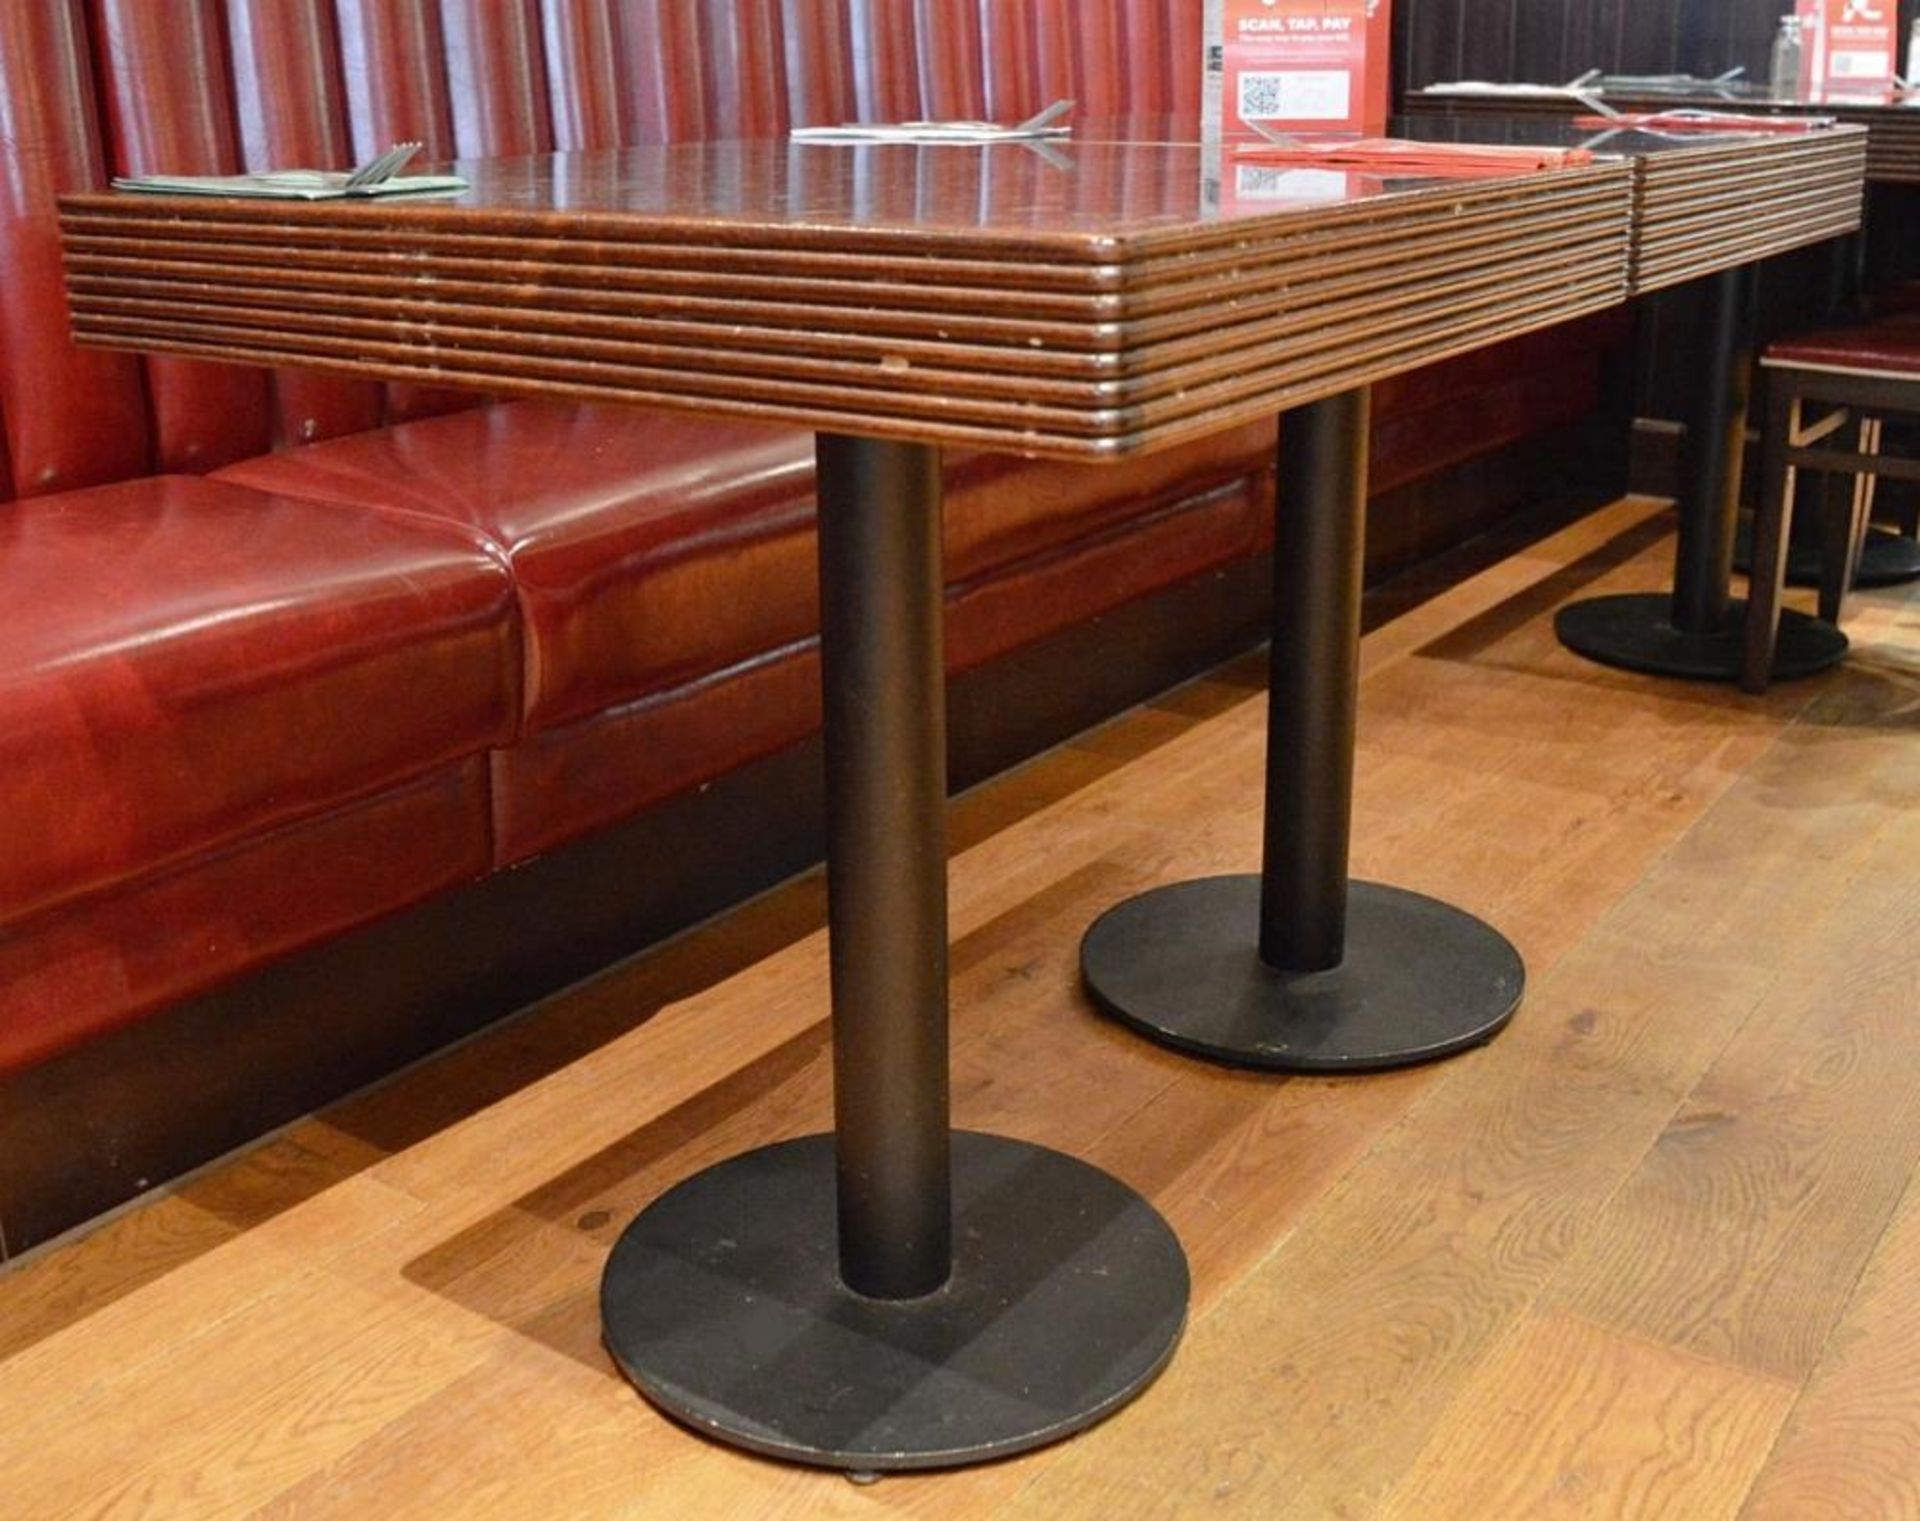 4 x Square Restaurant / Bistro Tables - Each Features A Wood Framed Top And Metal Base - 70x62xH80cm - Image 5 of 5